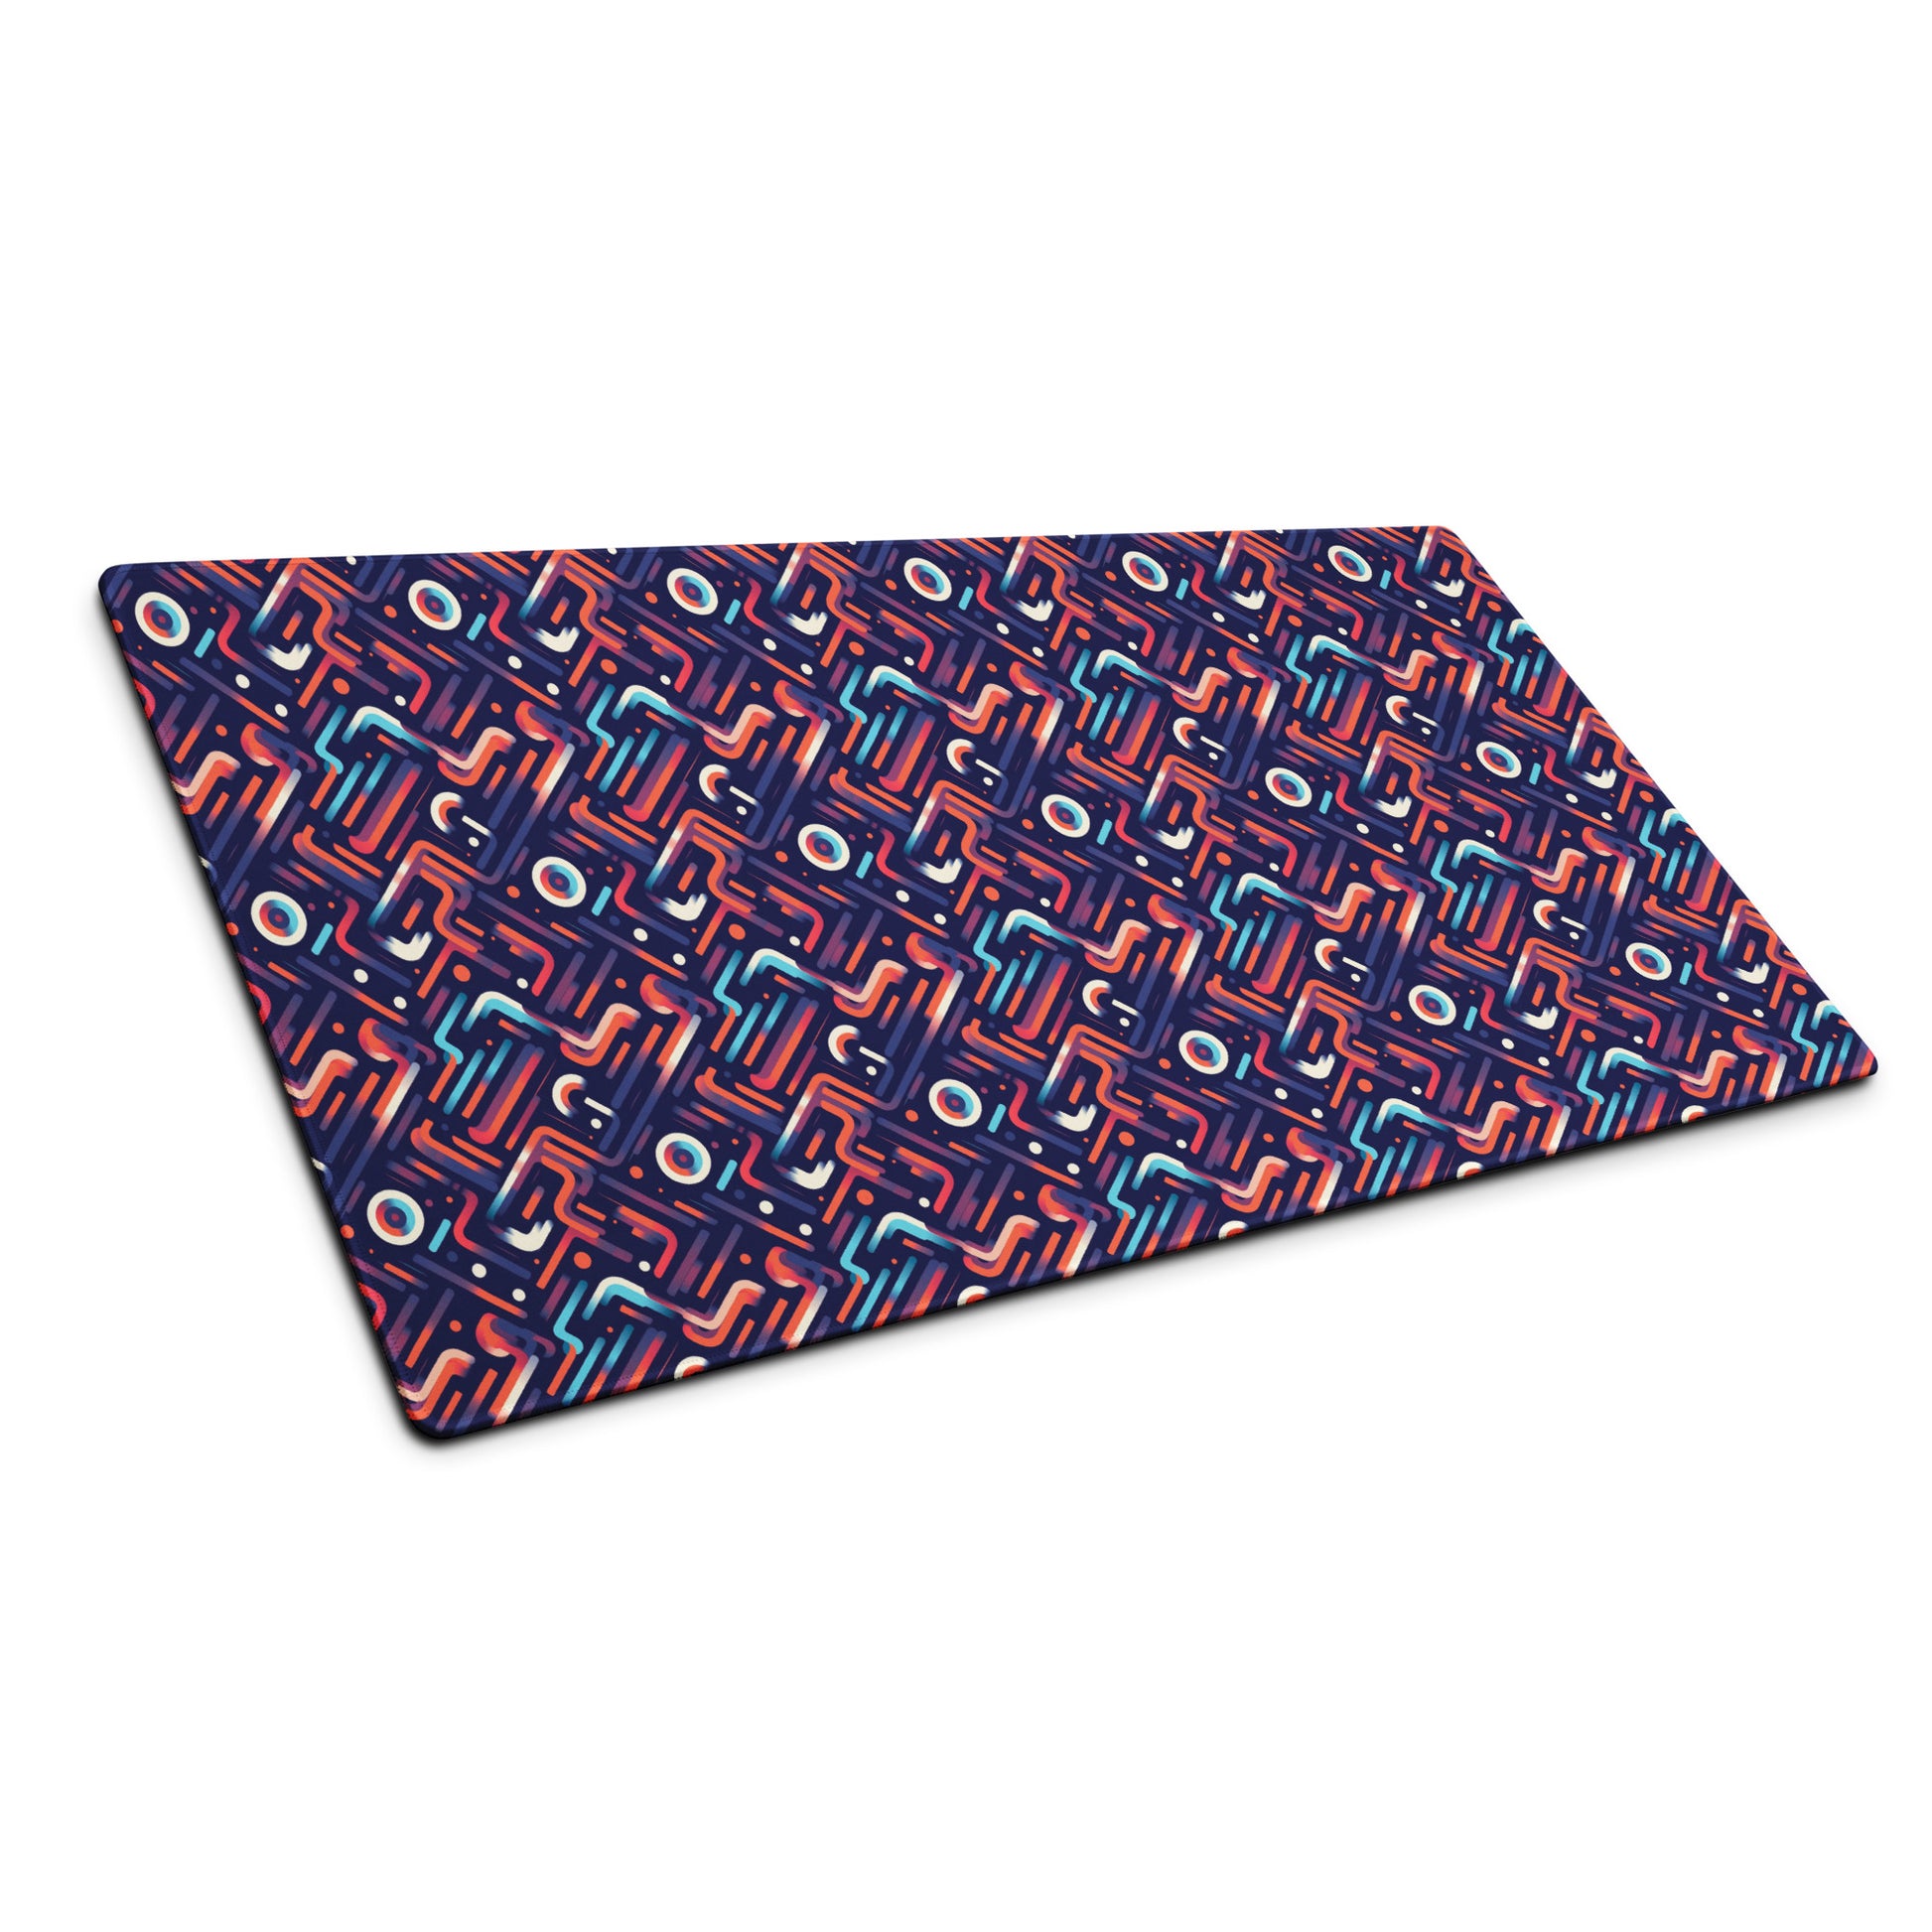 A 36" x 18" gaming desk pad with blue, orange, and purple lines on a dark blue background sitting at an angle.